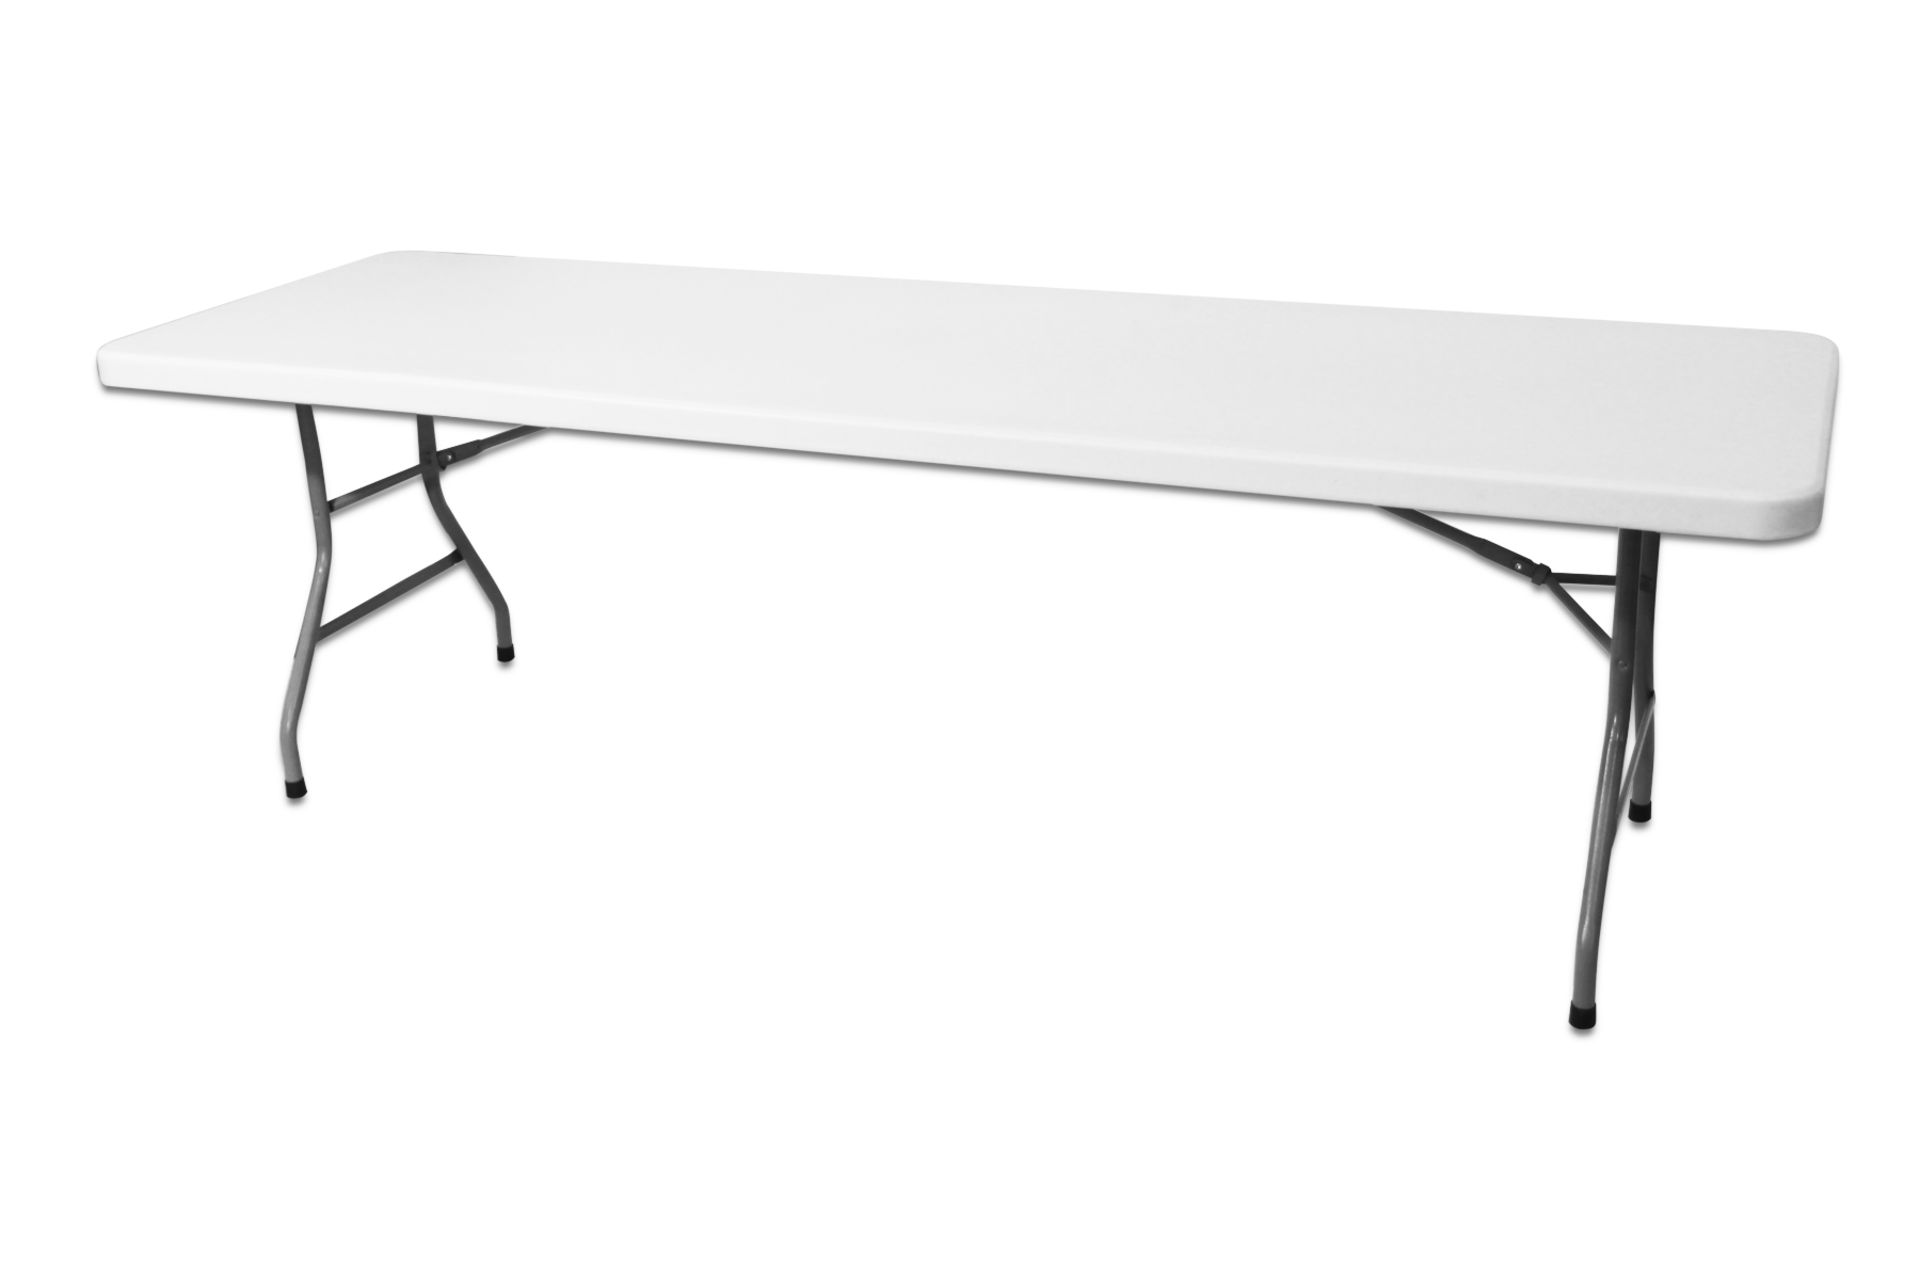 V *TRADE QTY* Grade A 8ft Plastic Trestle Table X 30 YOUR BID PRICE TO BE MULTIPLIED BY THIRTY - Image 2 of 5